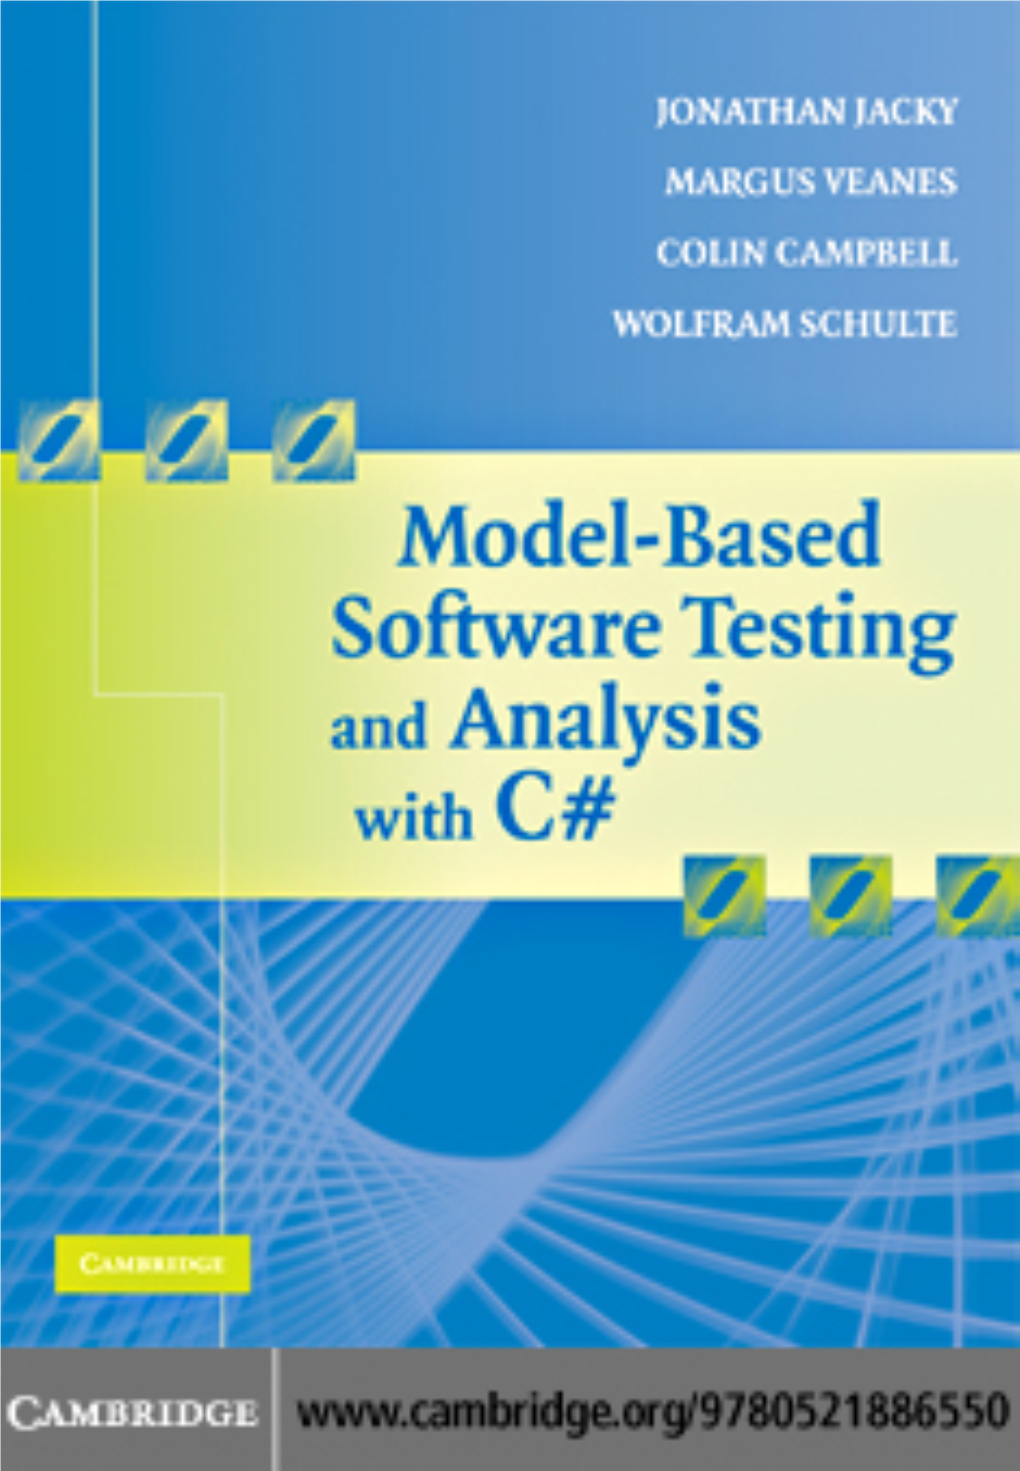 Model-Based Software Testing and Analysis with C